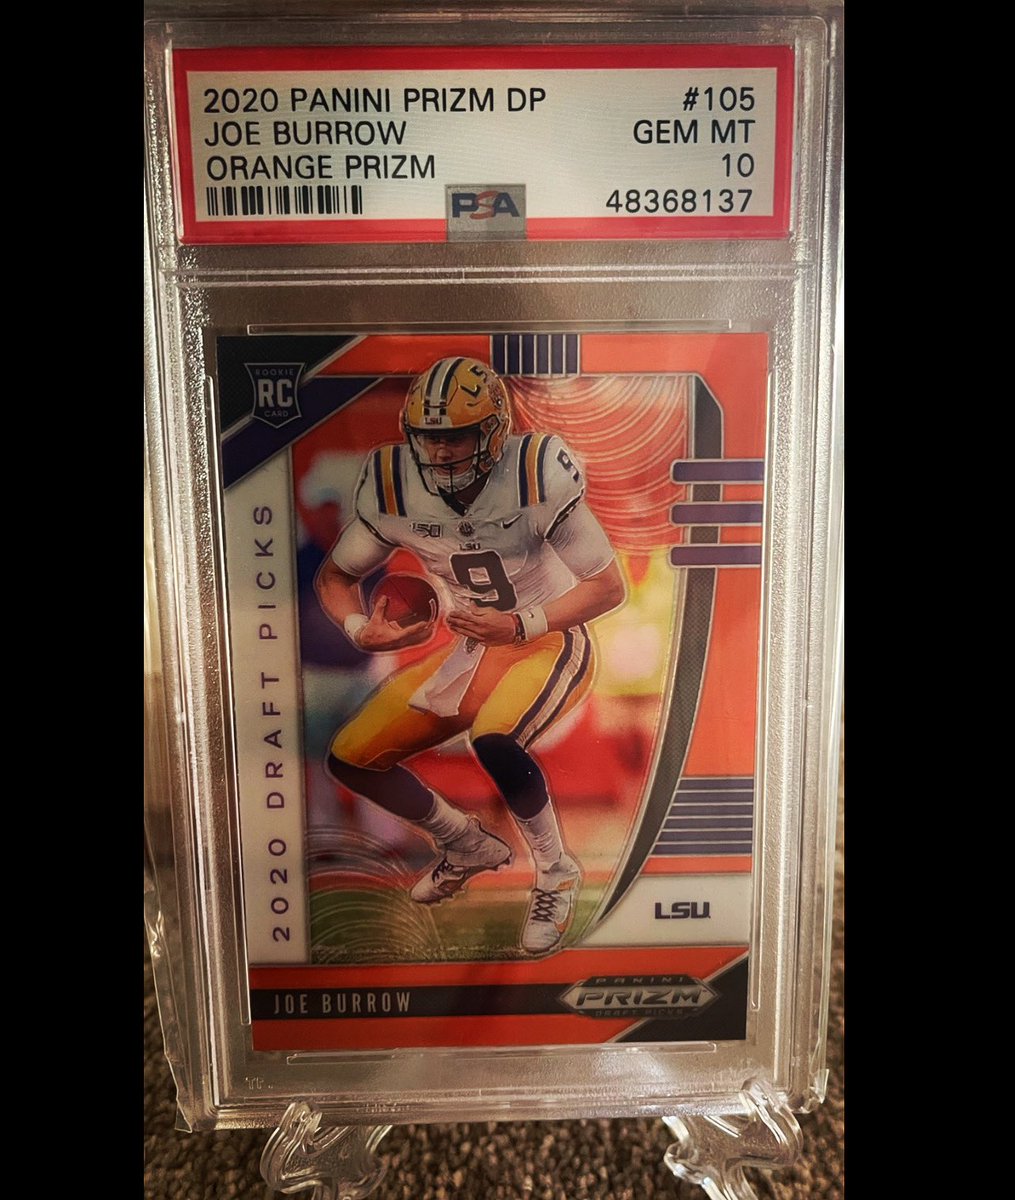 JOEY B!! 
With all the hype around this guy I had to post my best card of his!

#joeburrow #cinncinatibengals #lsu #nfl #superbowl #panini #psa #prizm #draft #rookie https://t.co/IvEK7CVrgL